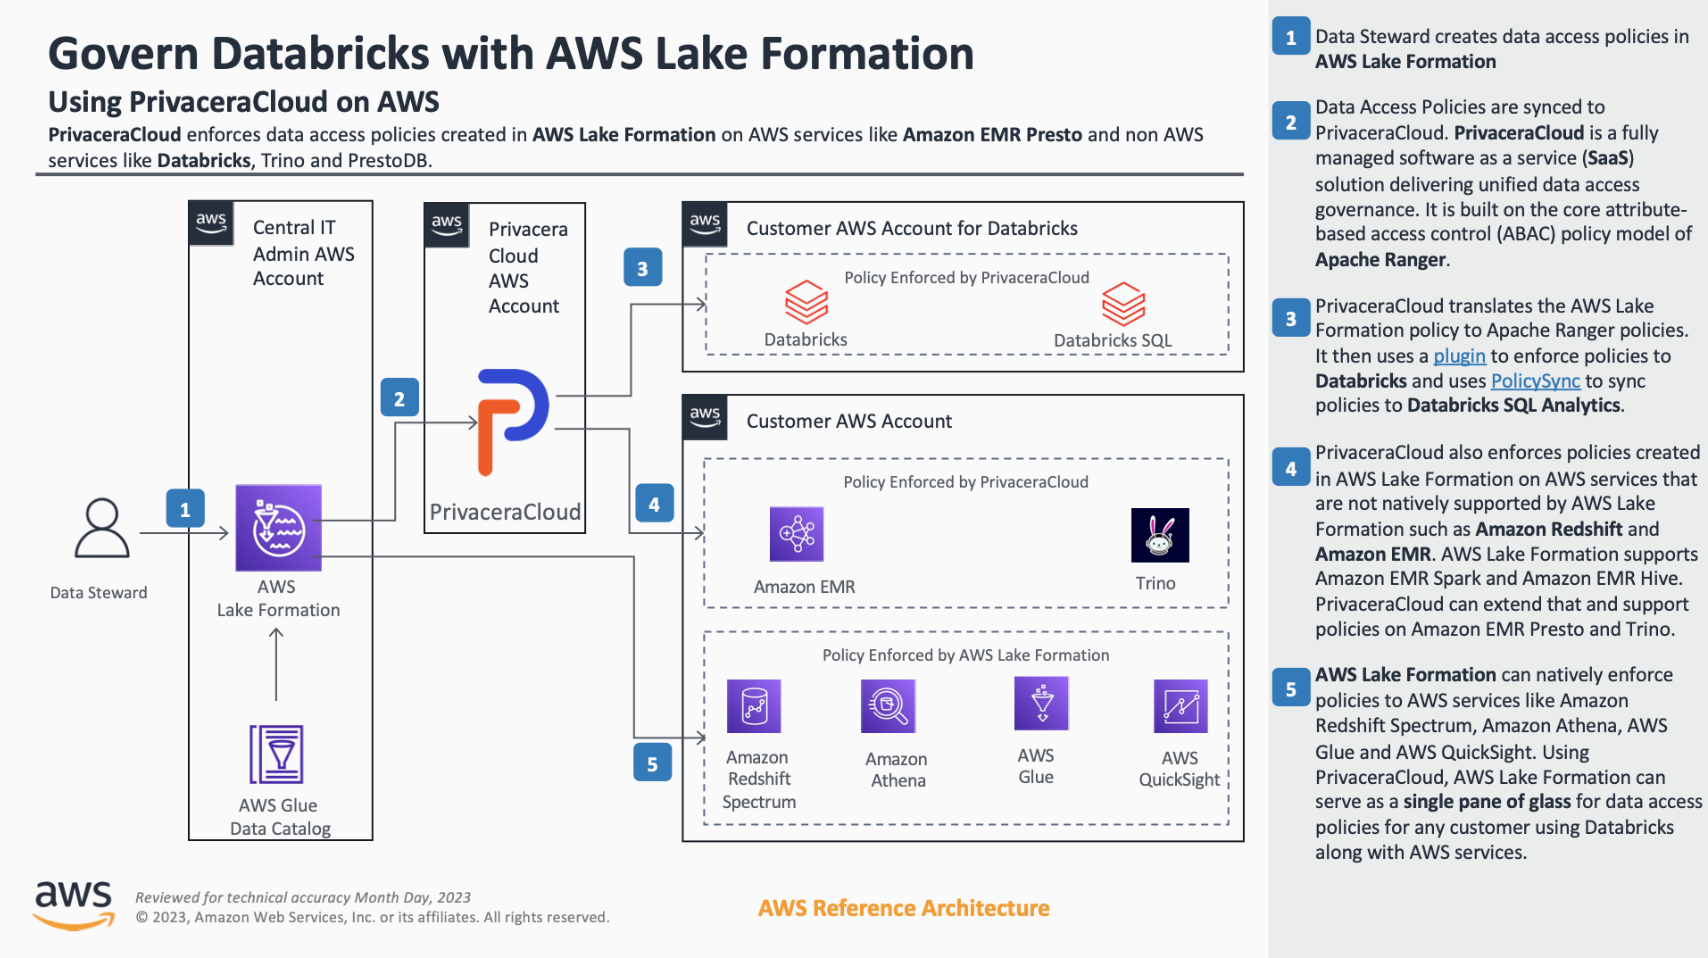 AWS reference architecture to govern Databricks access